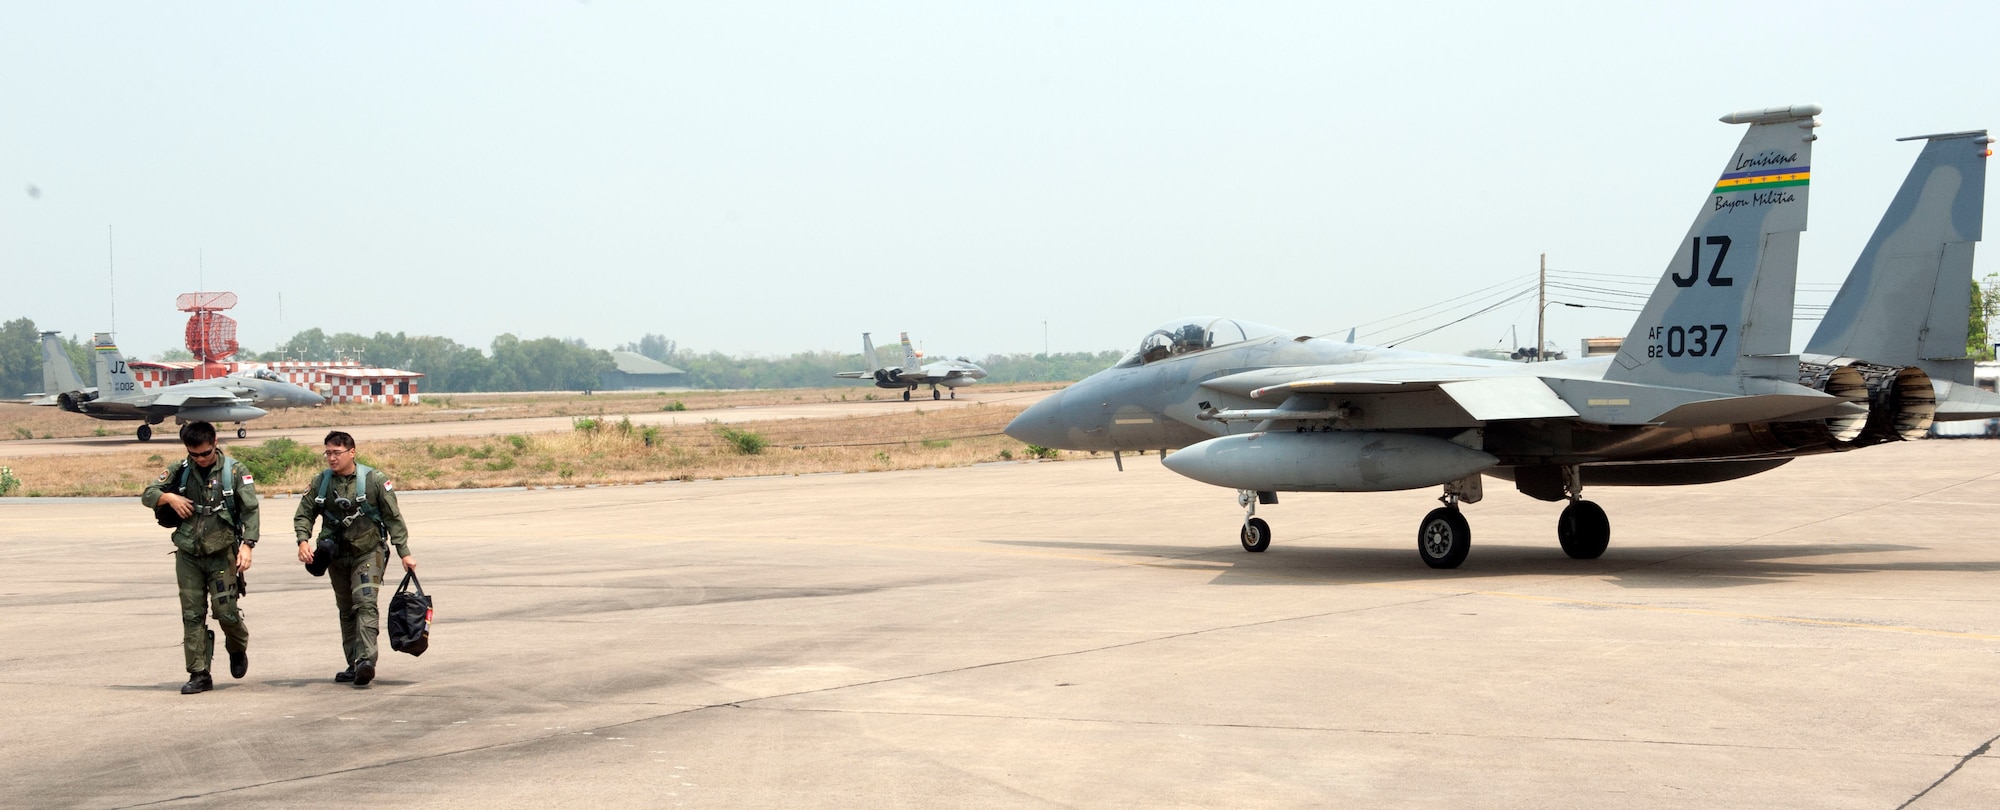 Two Republic of Singapore Air Force pilots head to their aircraft as fellow F-15 Eagle pilot U.S. Air Force Maj. Sheldon Gardener, Naval Air Station Joint Reserve Base New Orleans, taxis past them to the runway. Two other F-15's from the Louisiana Air National Guard are visible gearing for takeoff in the background. Cope Tiger 2014 is an annual, mulilateral aerial exercise to improve combat readiness, interoperability and build relations among Thai, Singapore and U.S. air forces. (U.S. Air Force photo by 2Lt. Michael Harrington/Released)